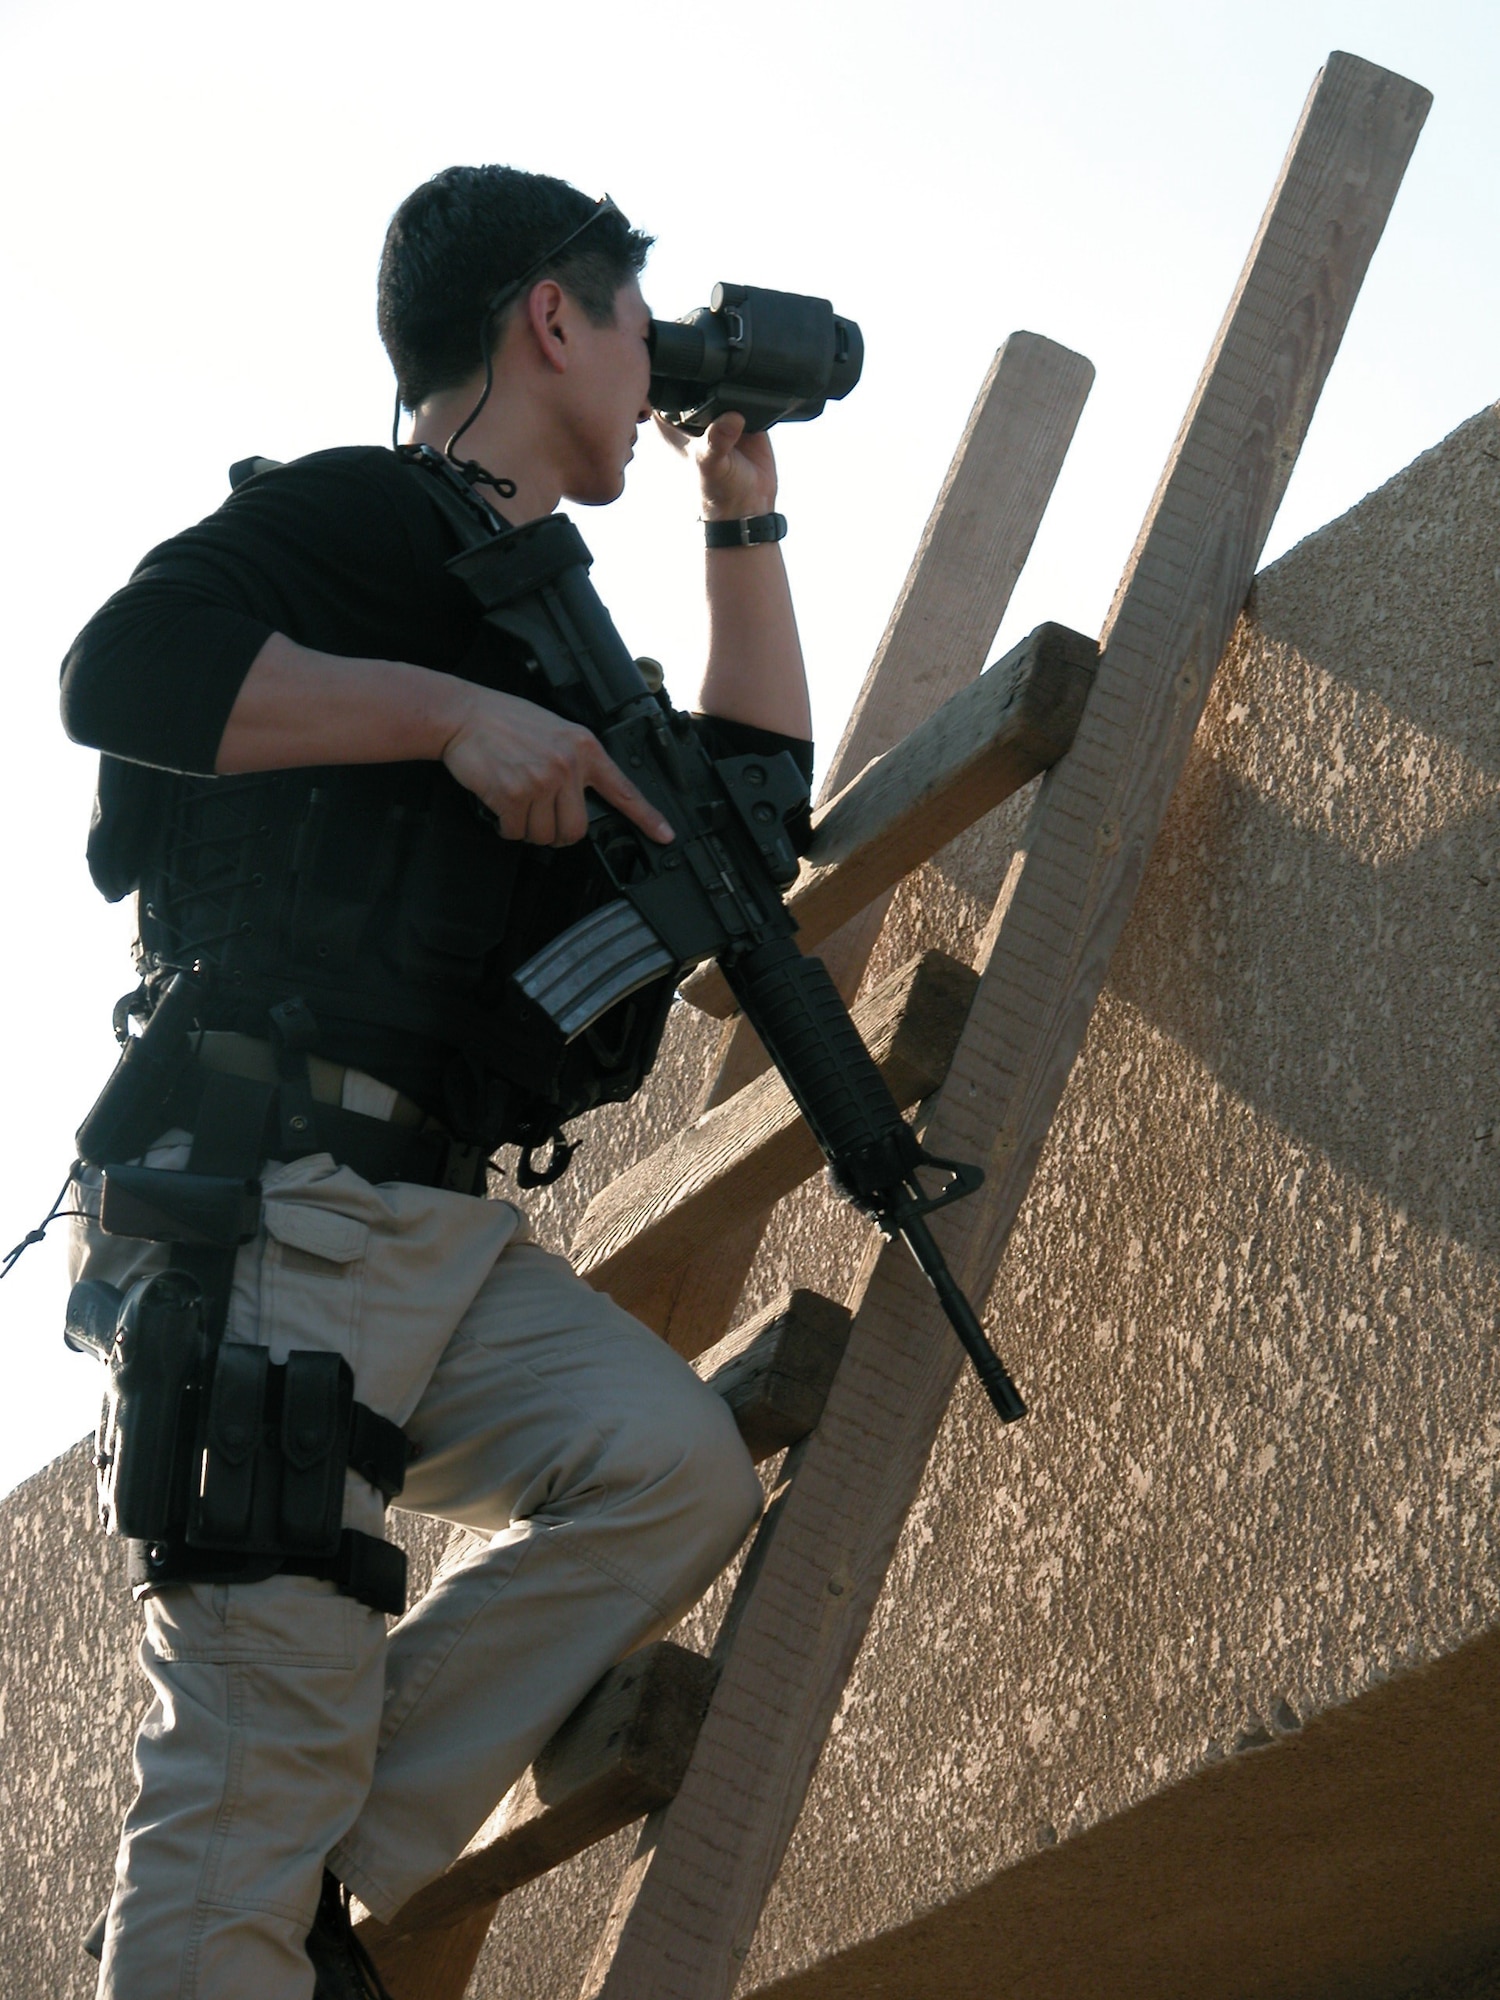 BAGHDAD, Iraq -- A special agent assigned to the Office of Special Investigations Detachment 2408 conducts a counter-surveillance mission near an entry control point here.  OSI agents protect Airmen and Soldiers deployed to Baghdad International Airport from many force-protection threats.  (U.S. Air Force photo)